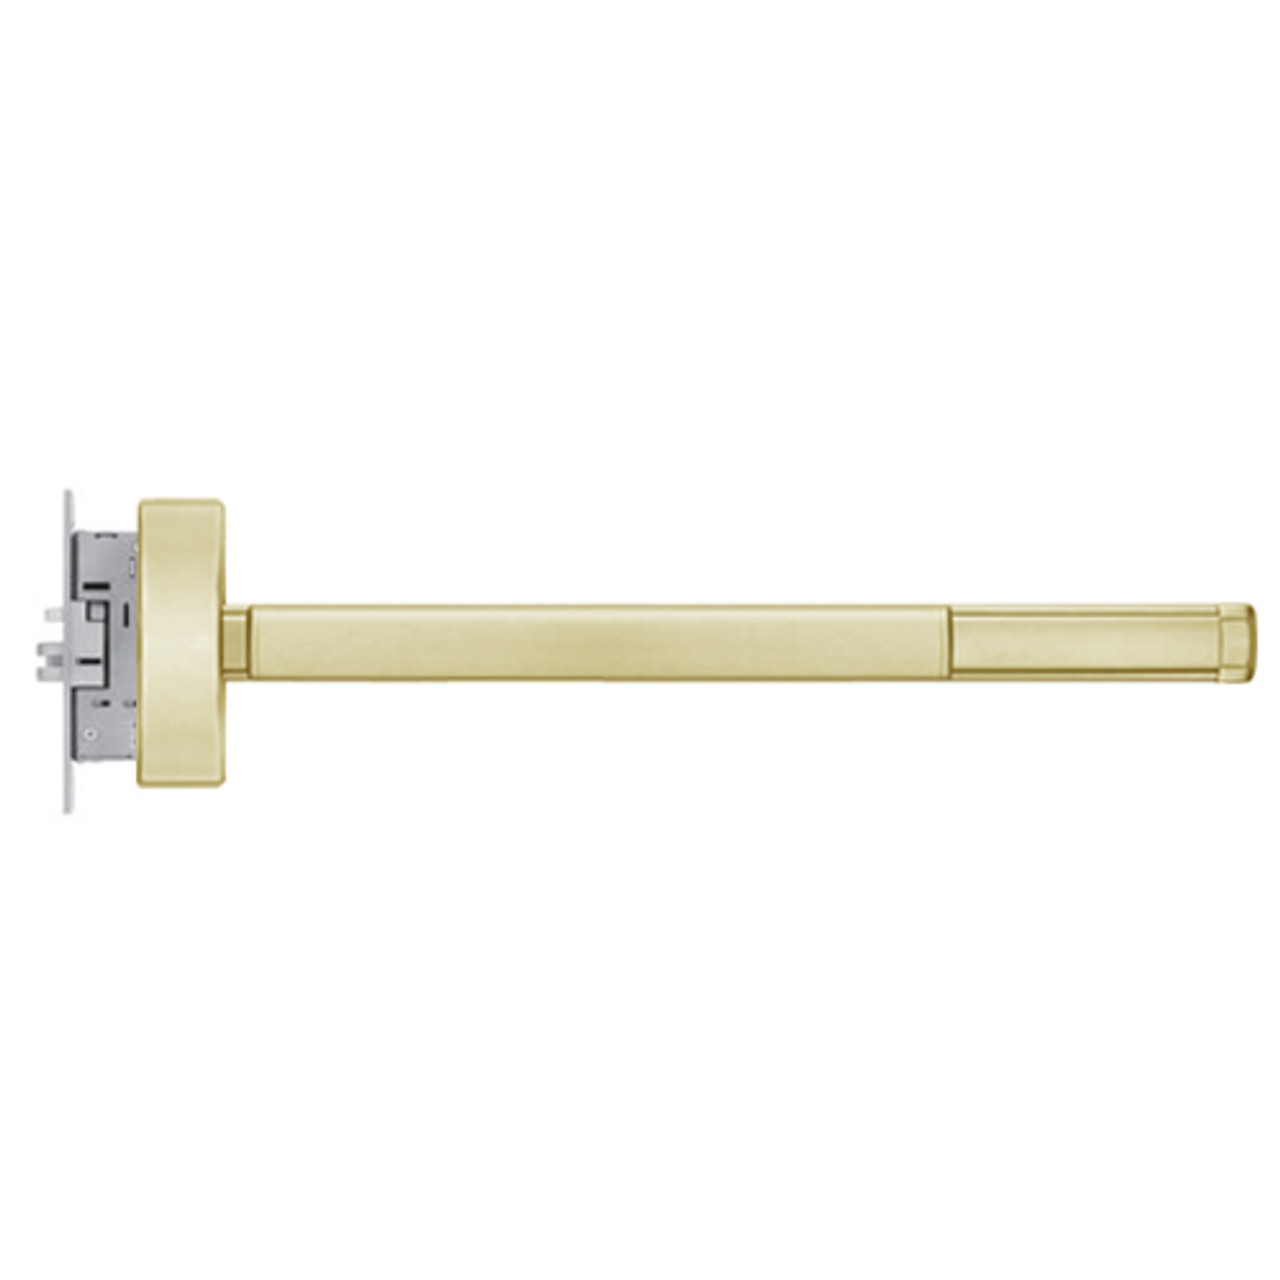 DEFL2308-LHR-606-48 PHI 2300 Series Fire Rated Apex Mortise Exit Device with Delayed Egress Prepped for Key Controls Lever/Knob in Satin Brass Finish